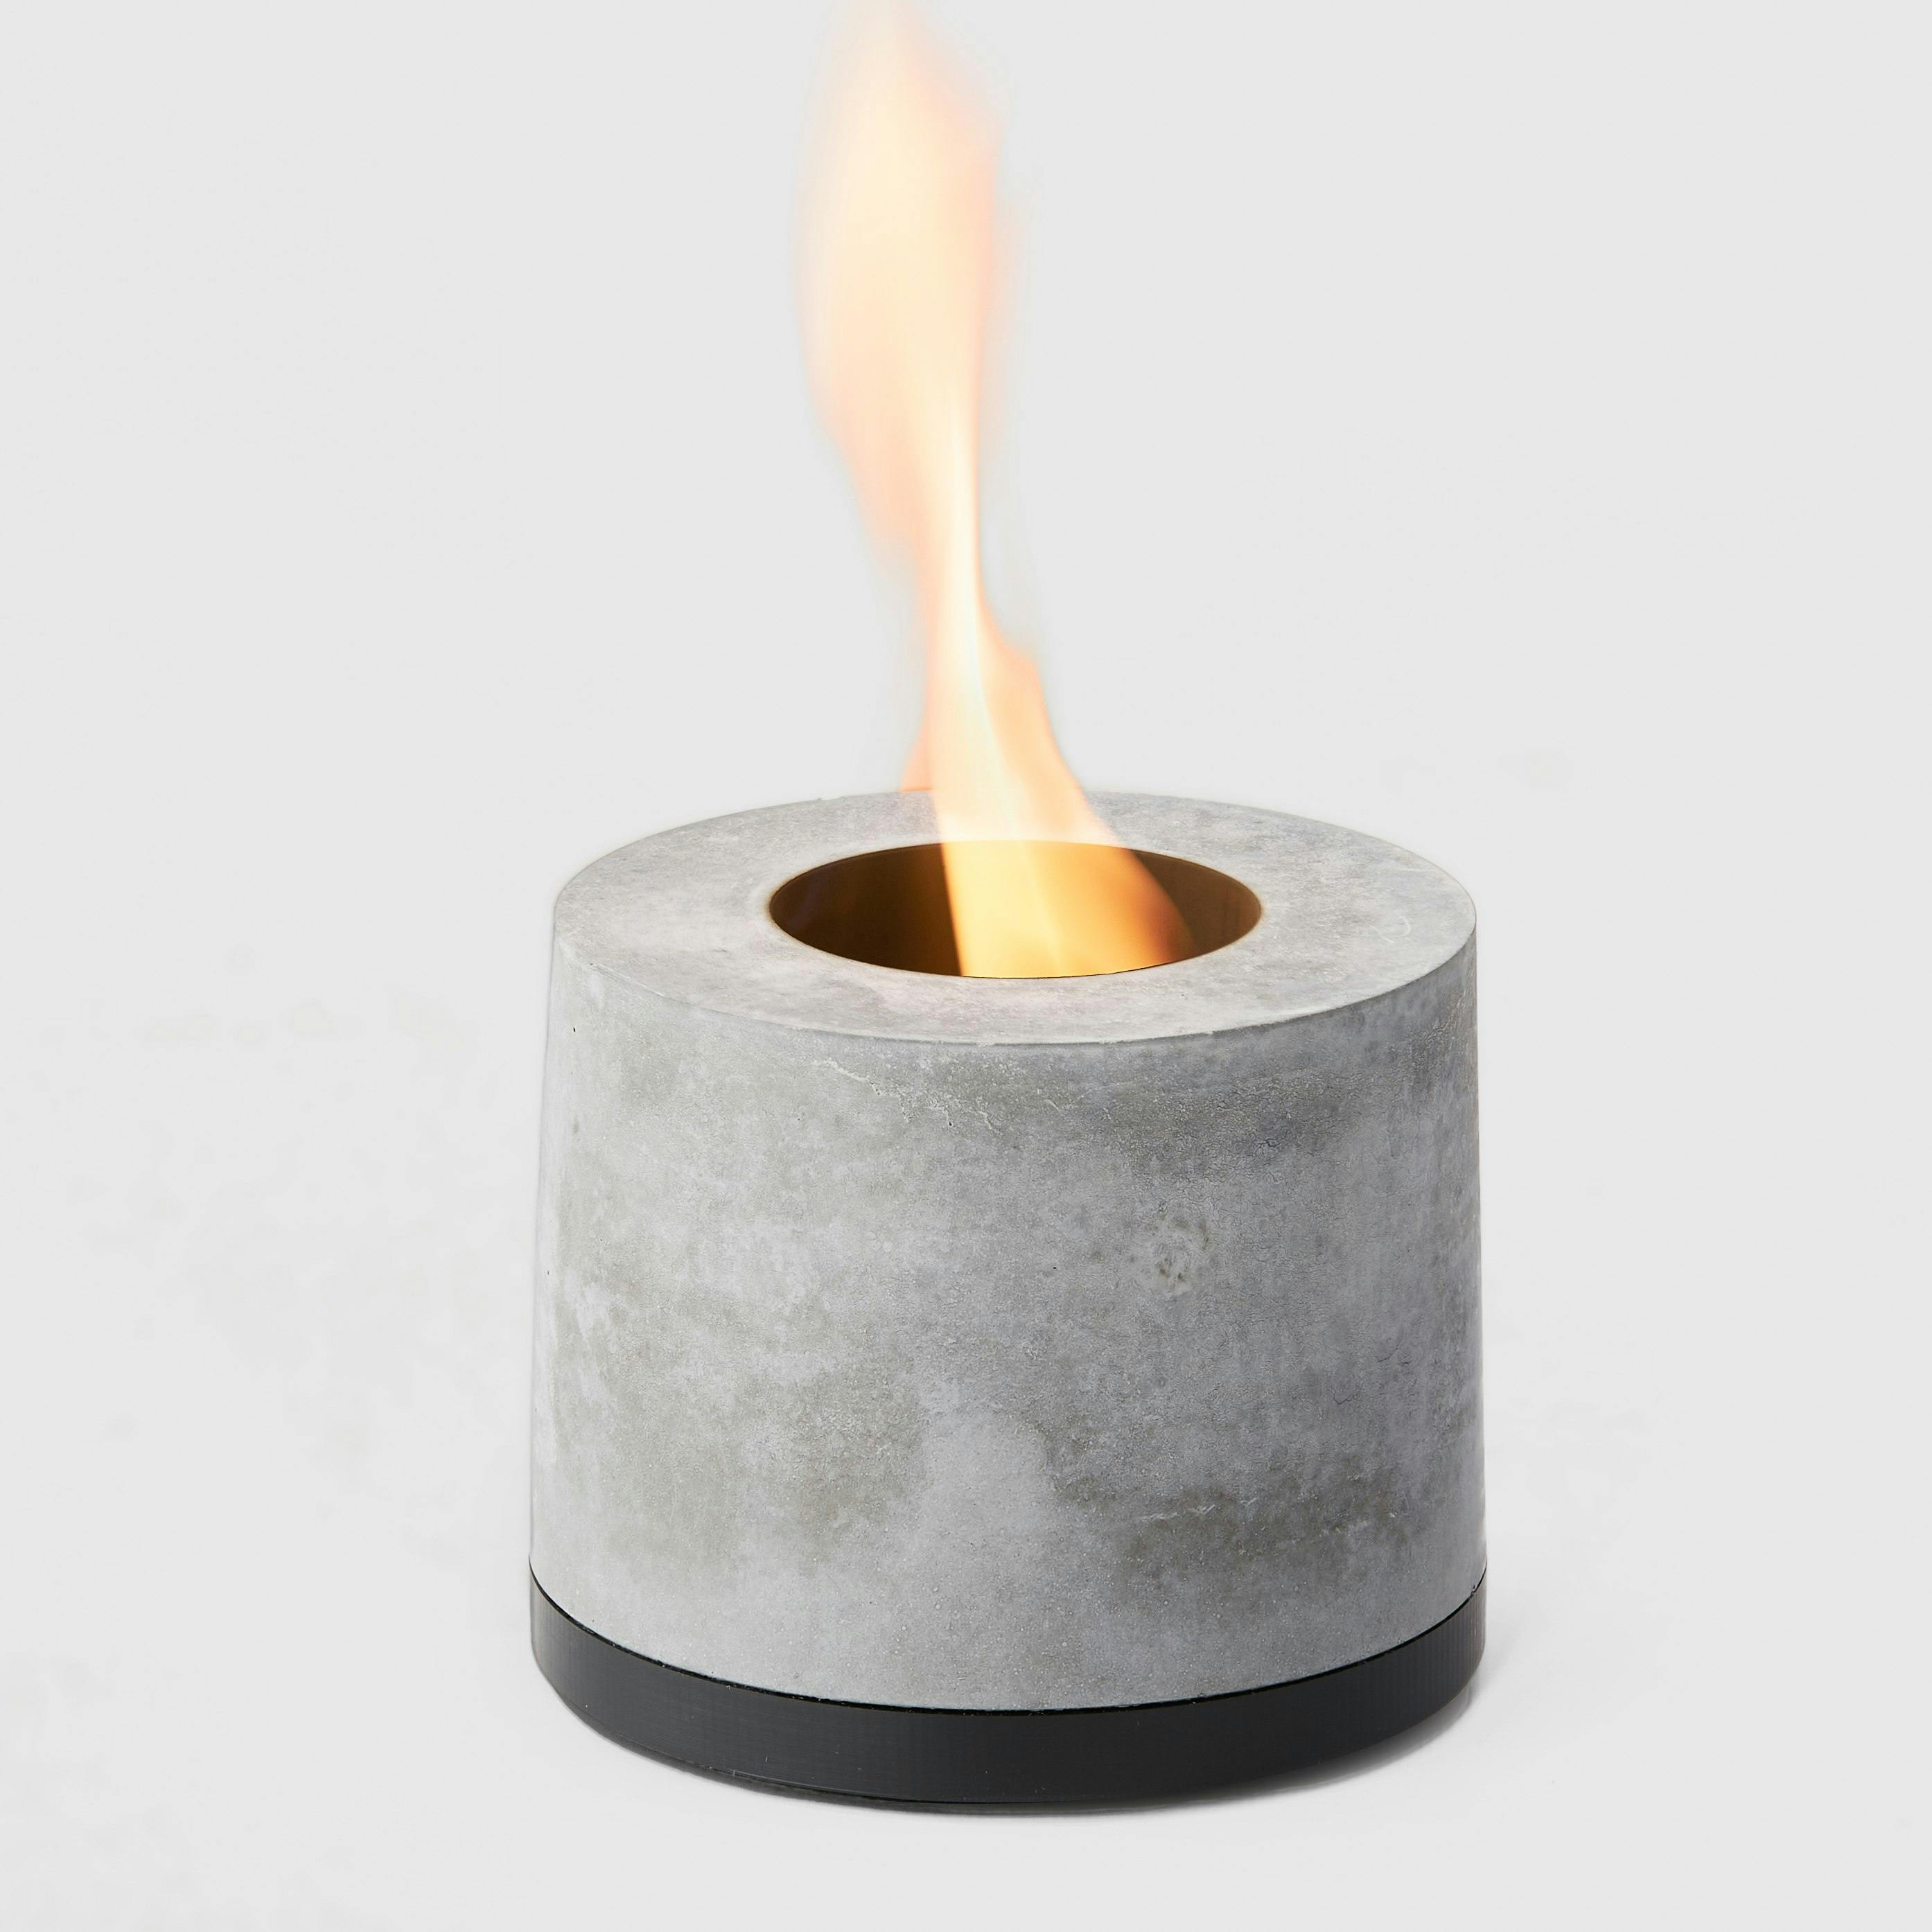 FLIKR Fire Personal Concrete Fireplace - Exclusive